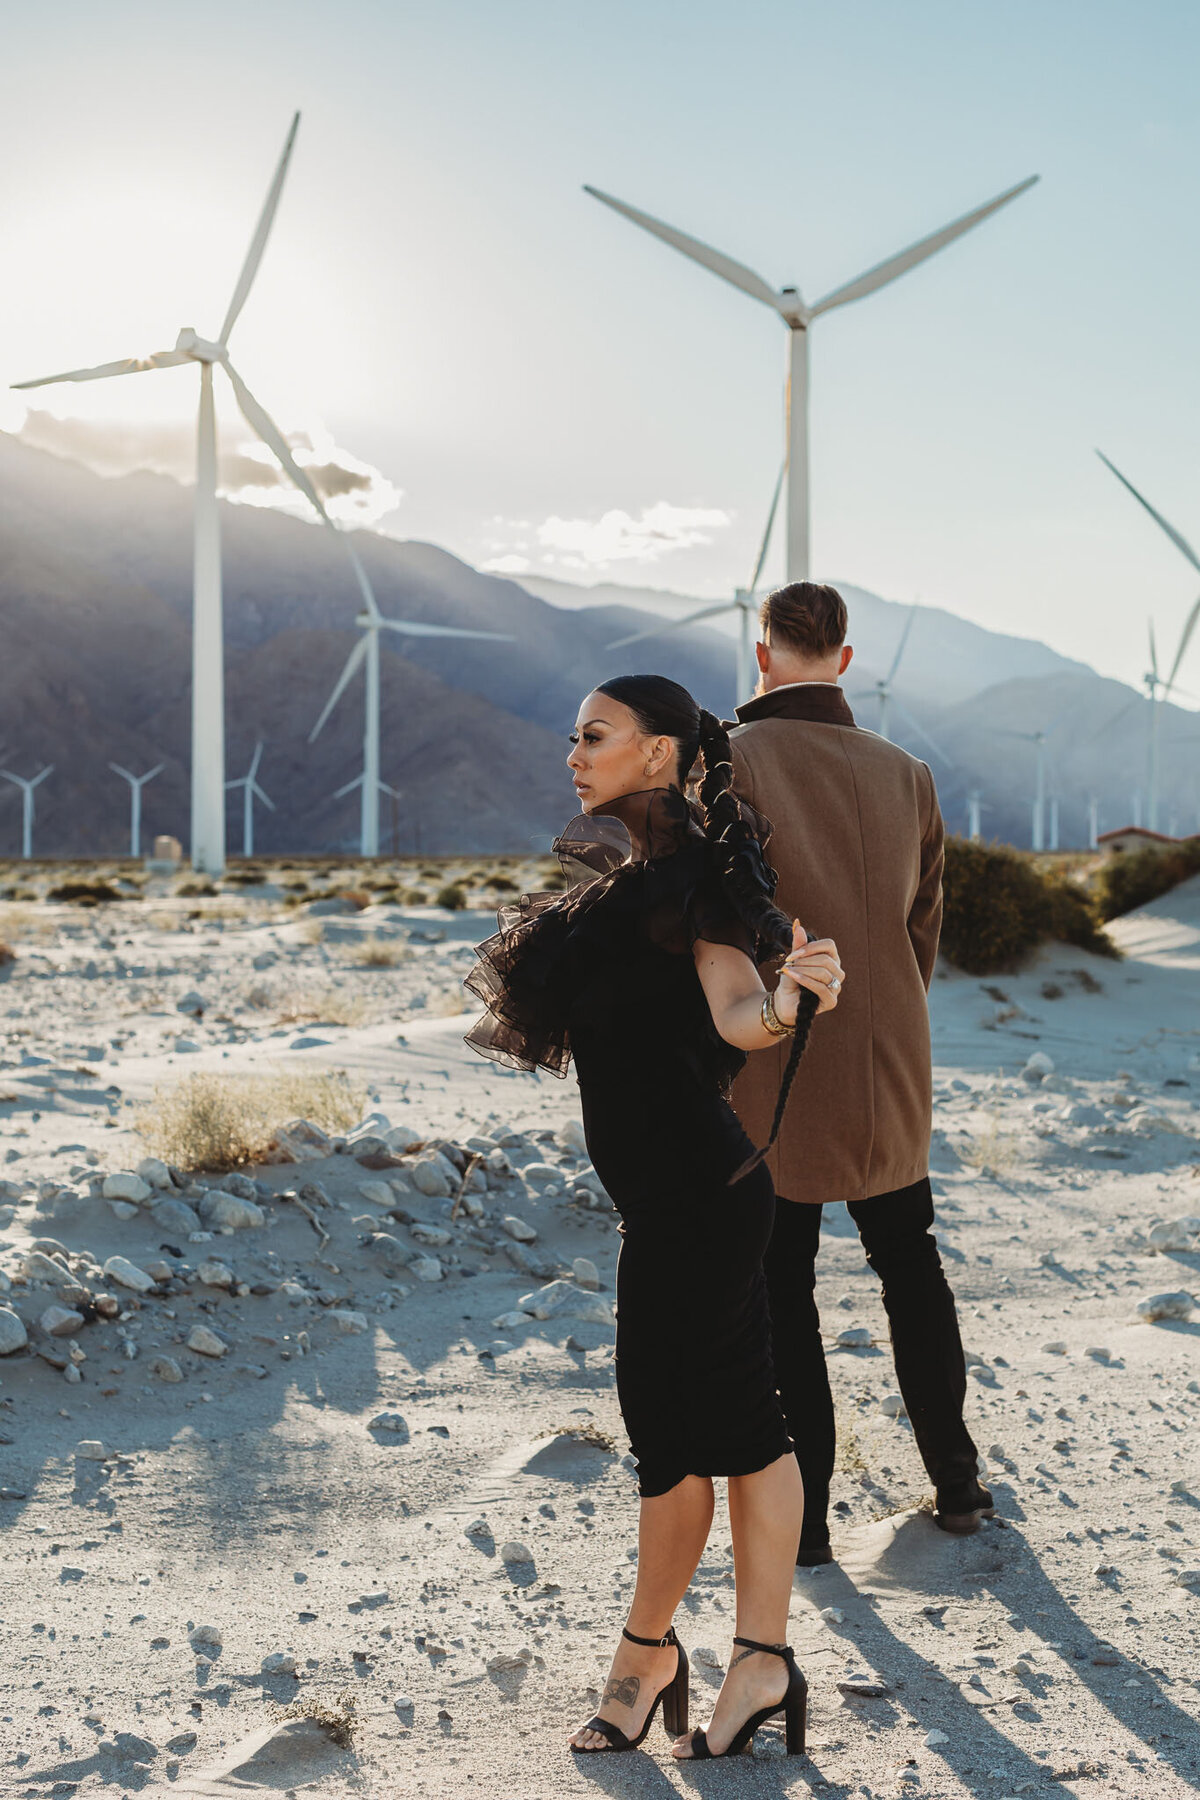 melissa-fe-chapman-photography-Palm-Springs-Windmills-Engagement-Session 1-4